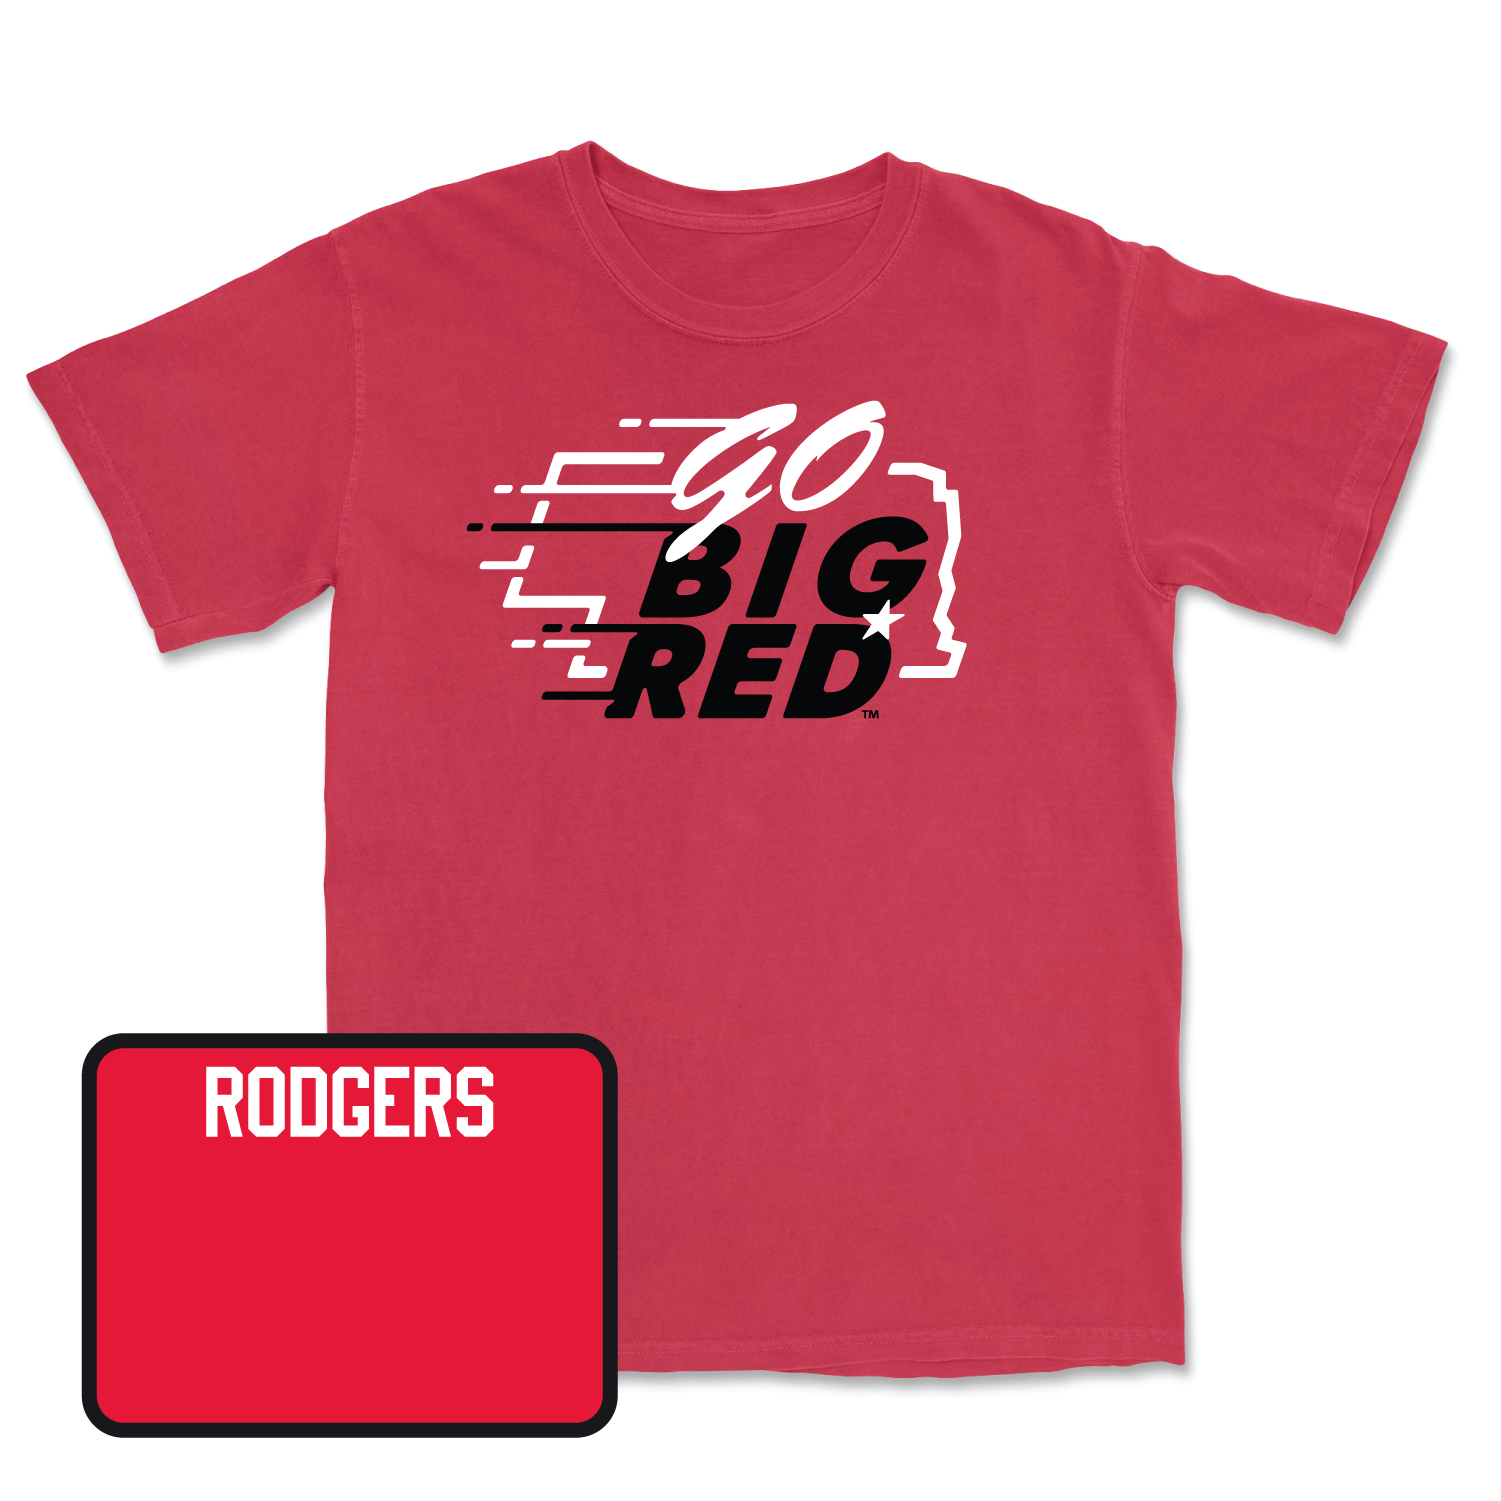 Red Track & Field GBR Tee X-Large / Omar Rodgers